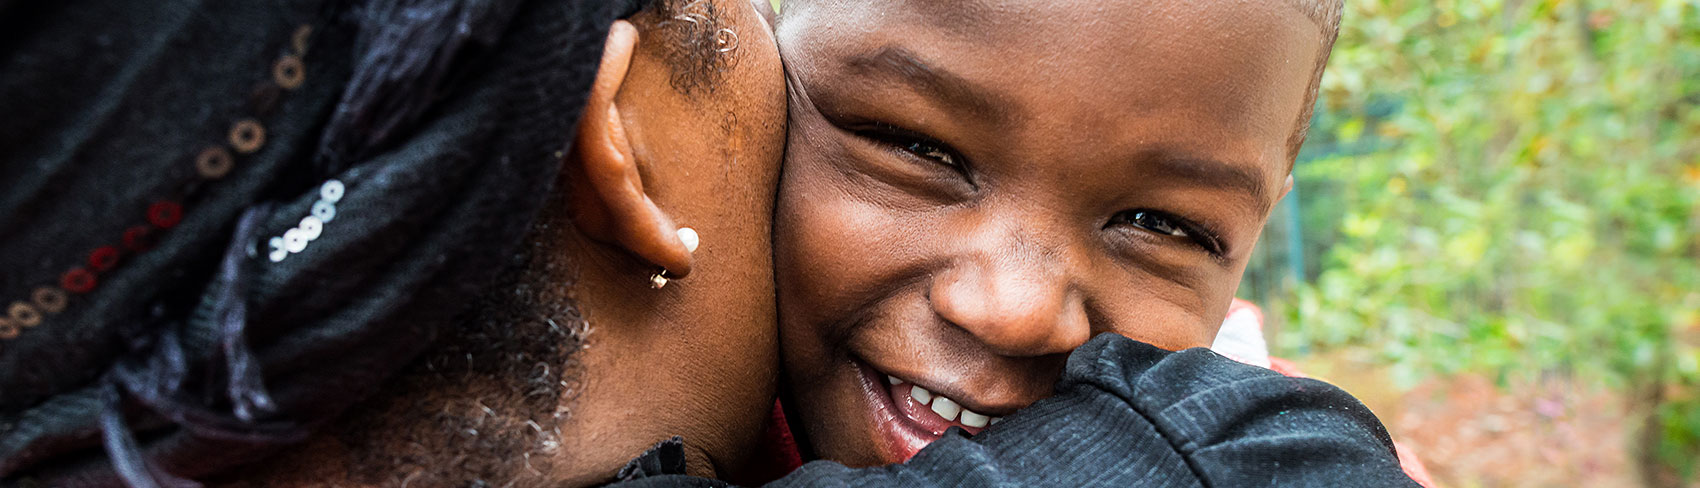 Fostering hope in Haiti  Banner Image